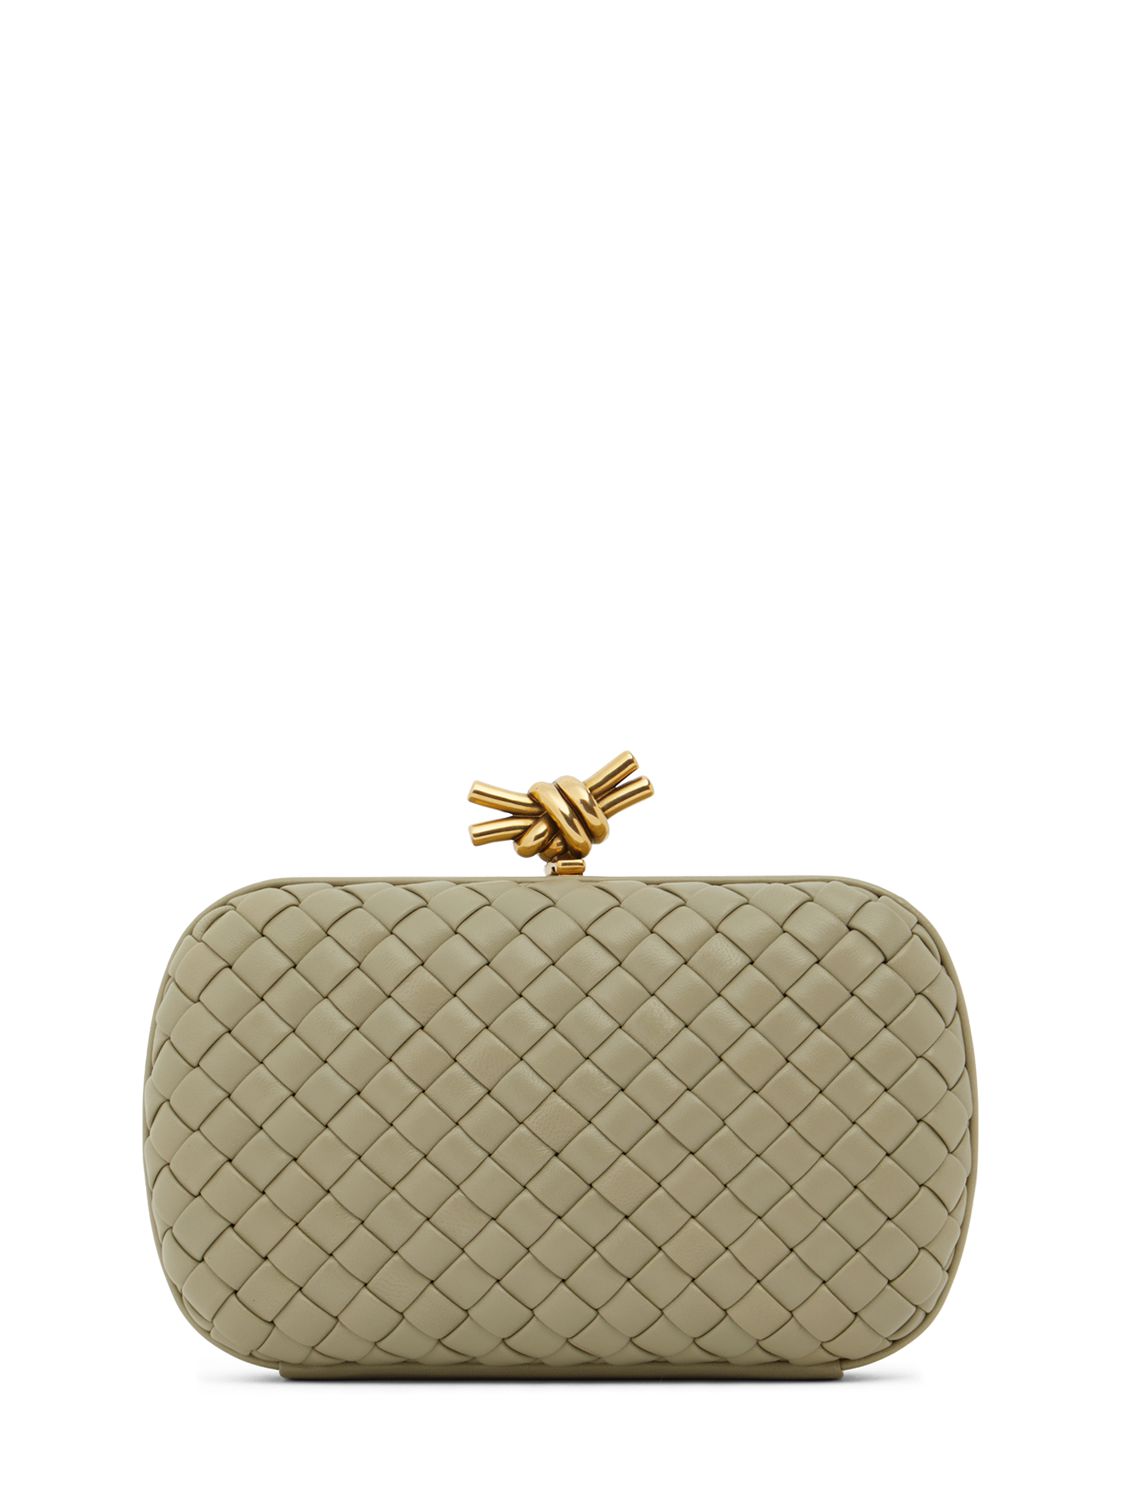 Knot Leather Clutch